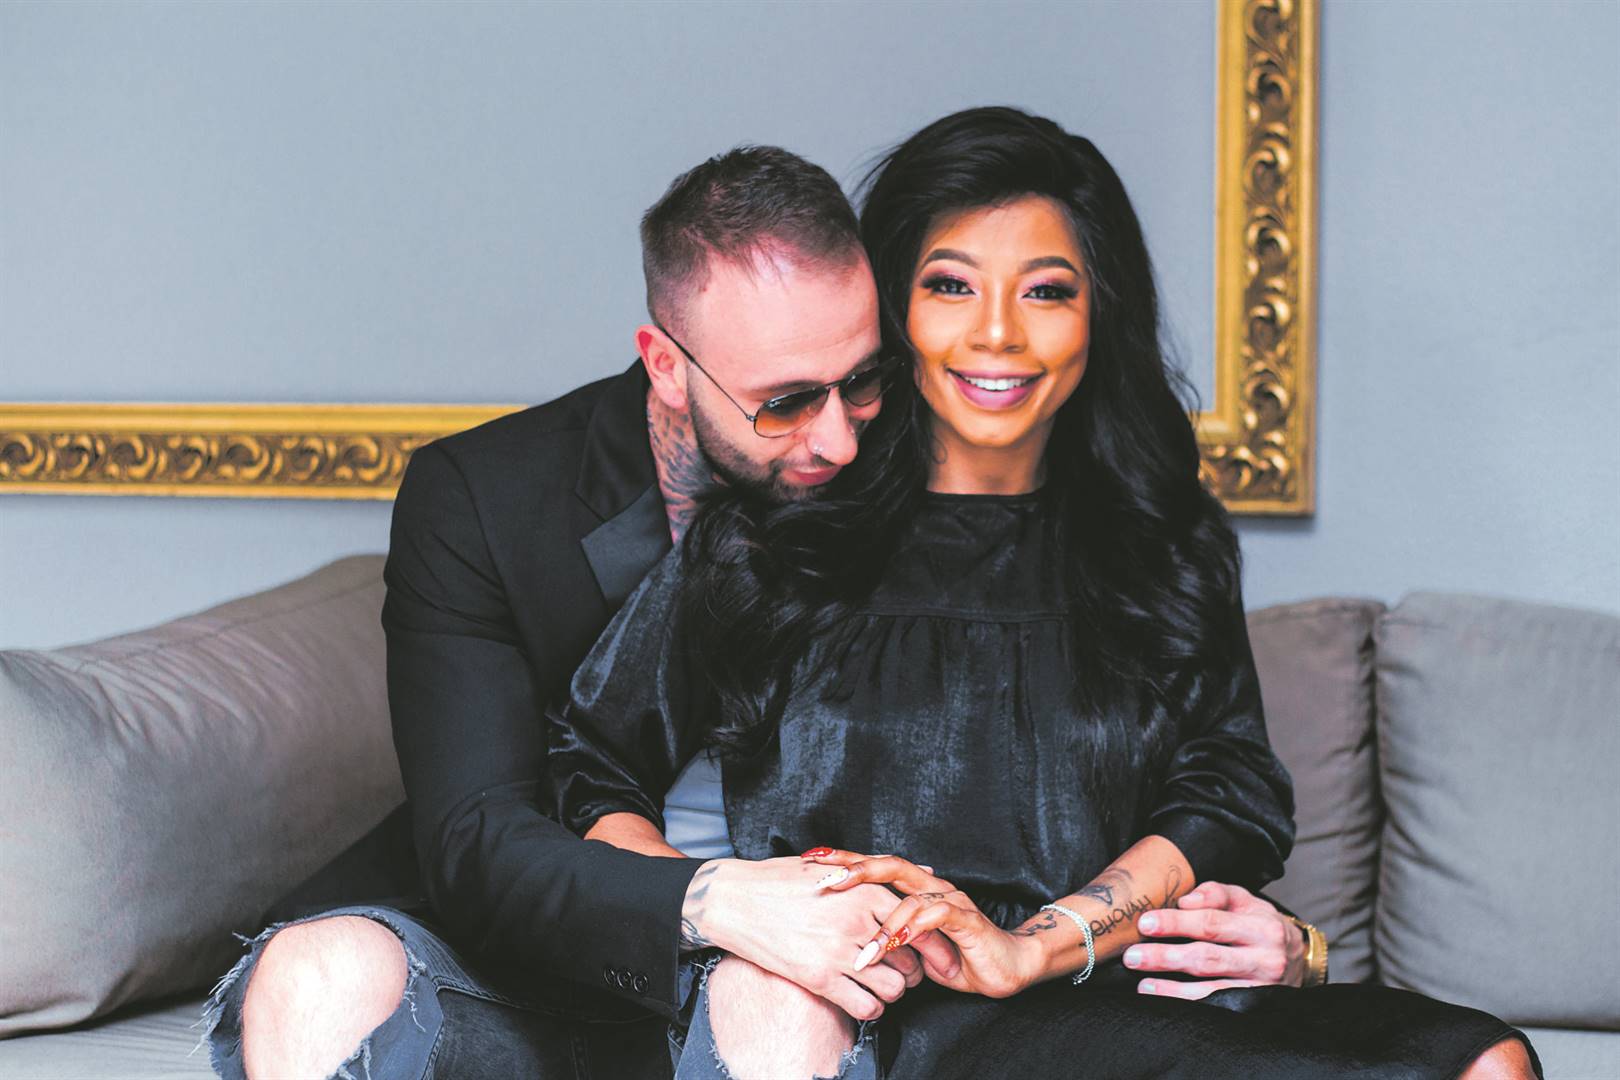 Kelly & Chad: 'God's publicity stunt' brought us back together | Citypress